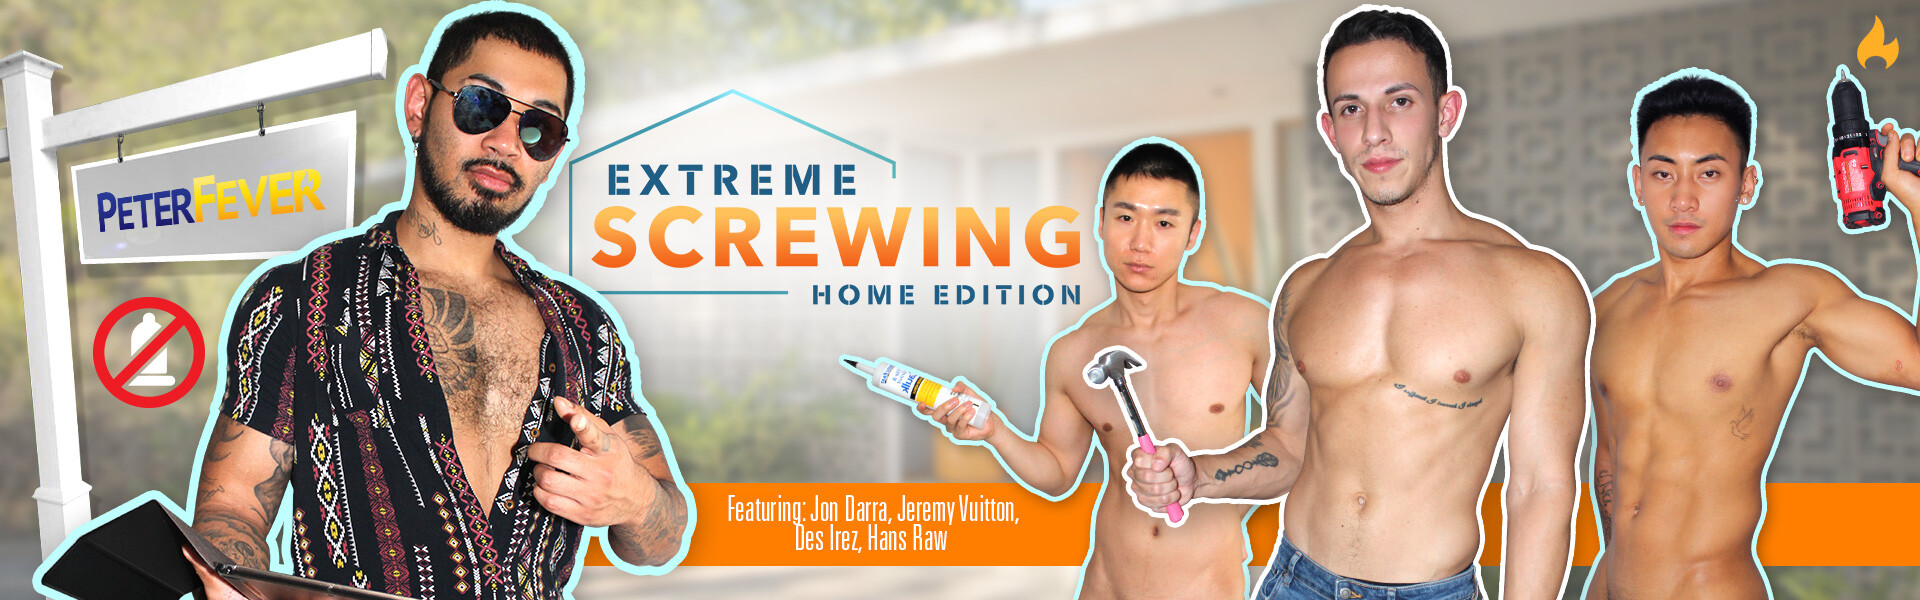 Extreme Screwing: Home Edition